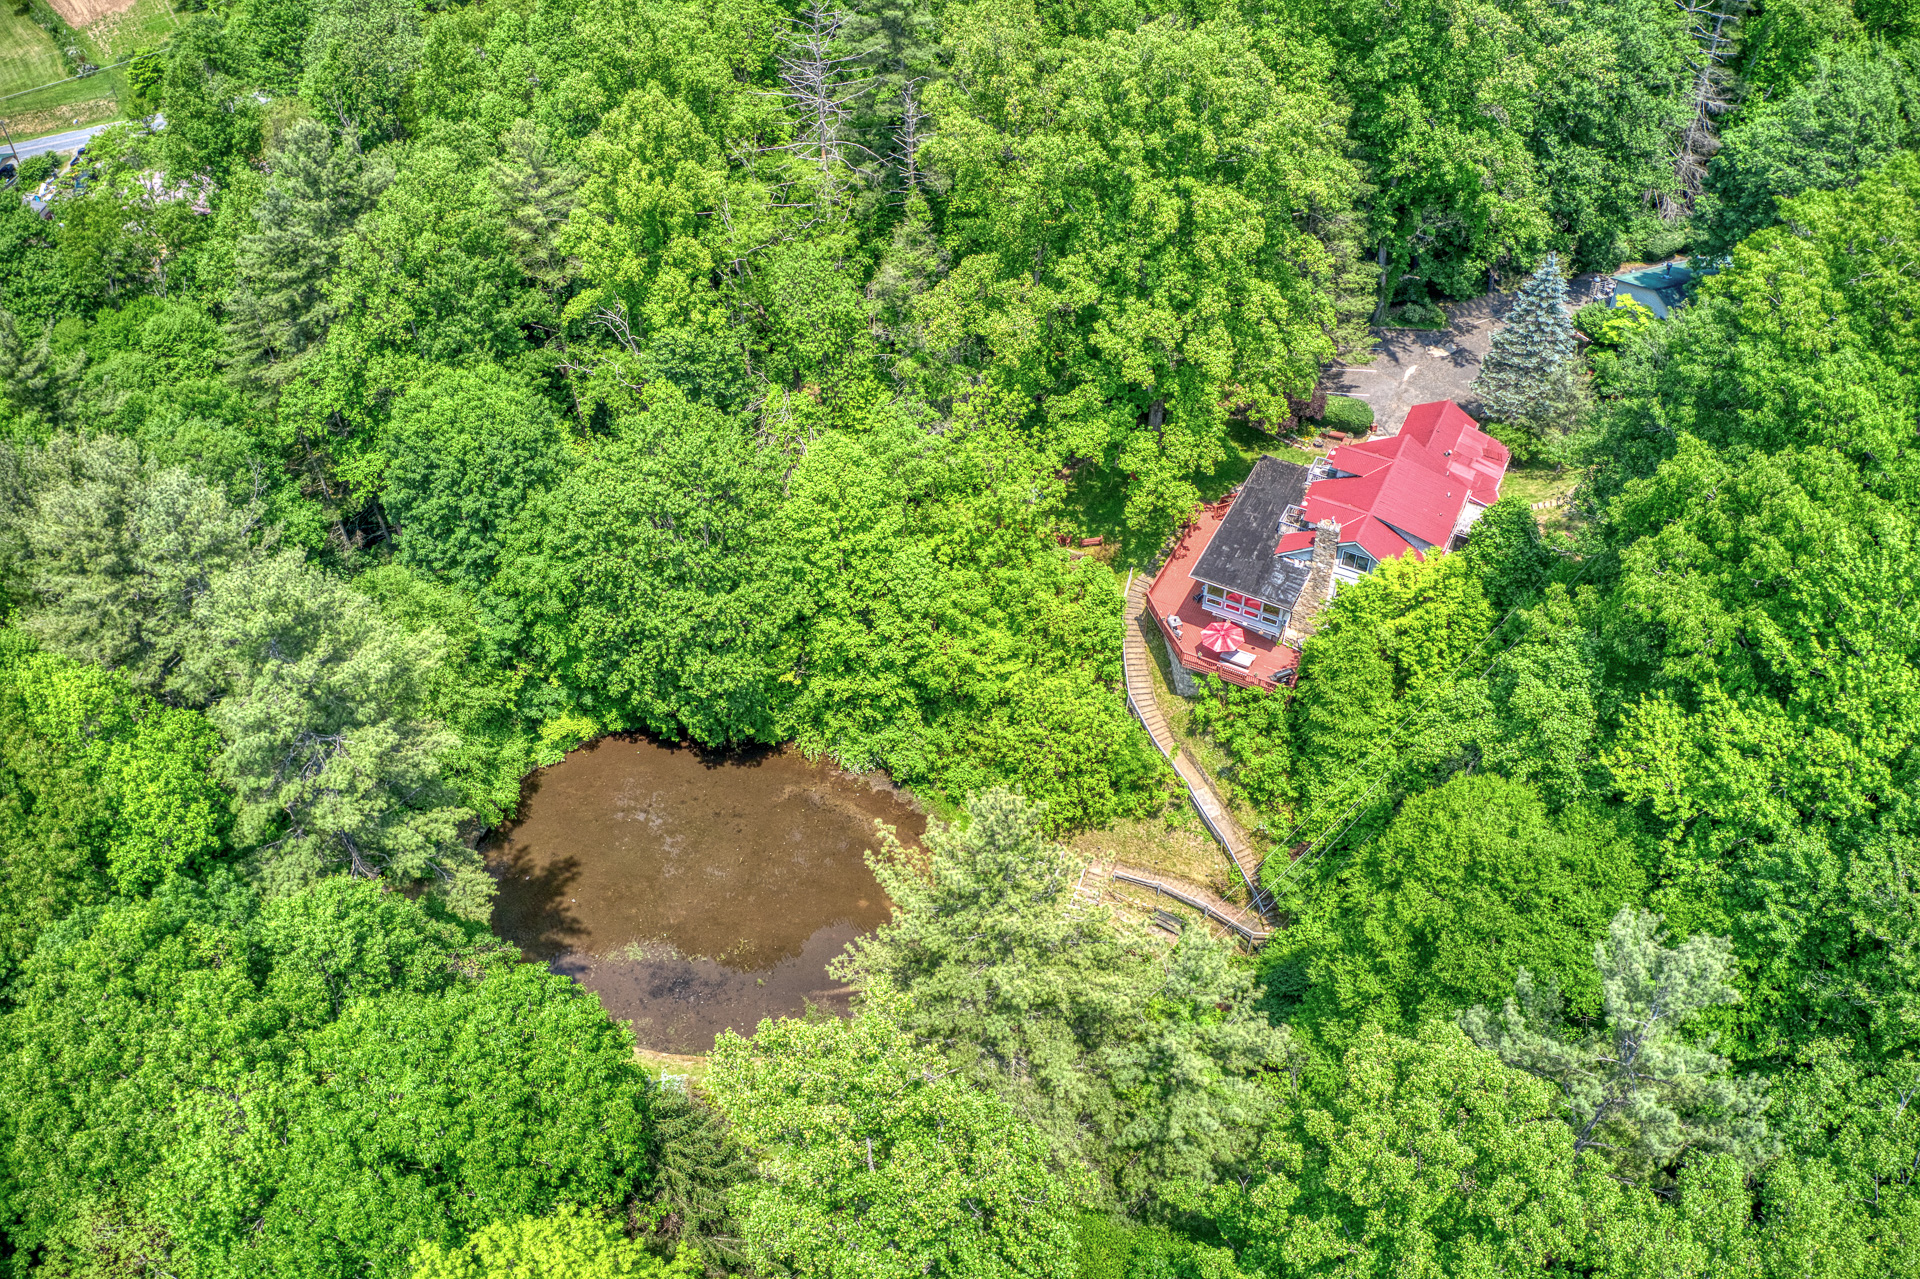 Drone view of Red Leaf River Inn Bed and Breakfast in North Carolina's Smoky Mountains